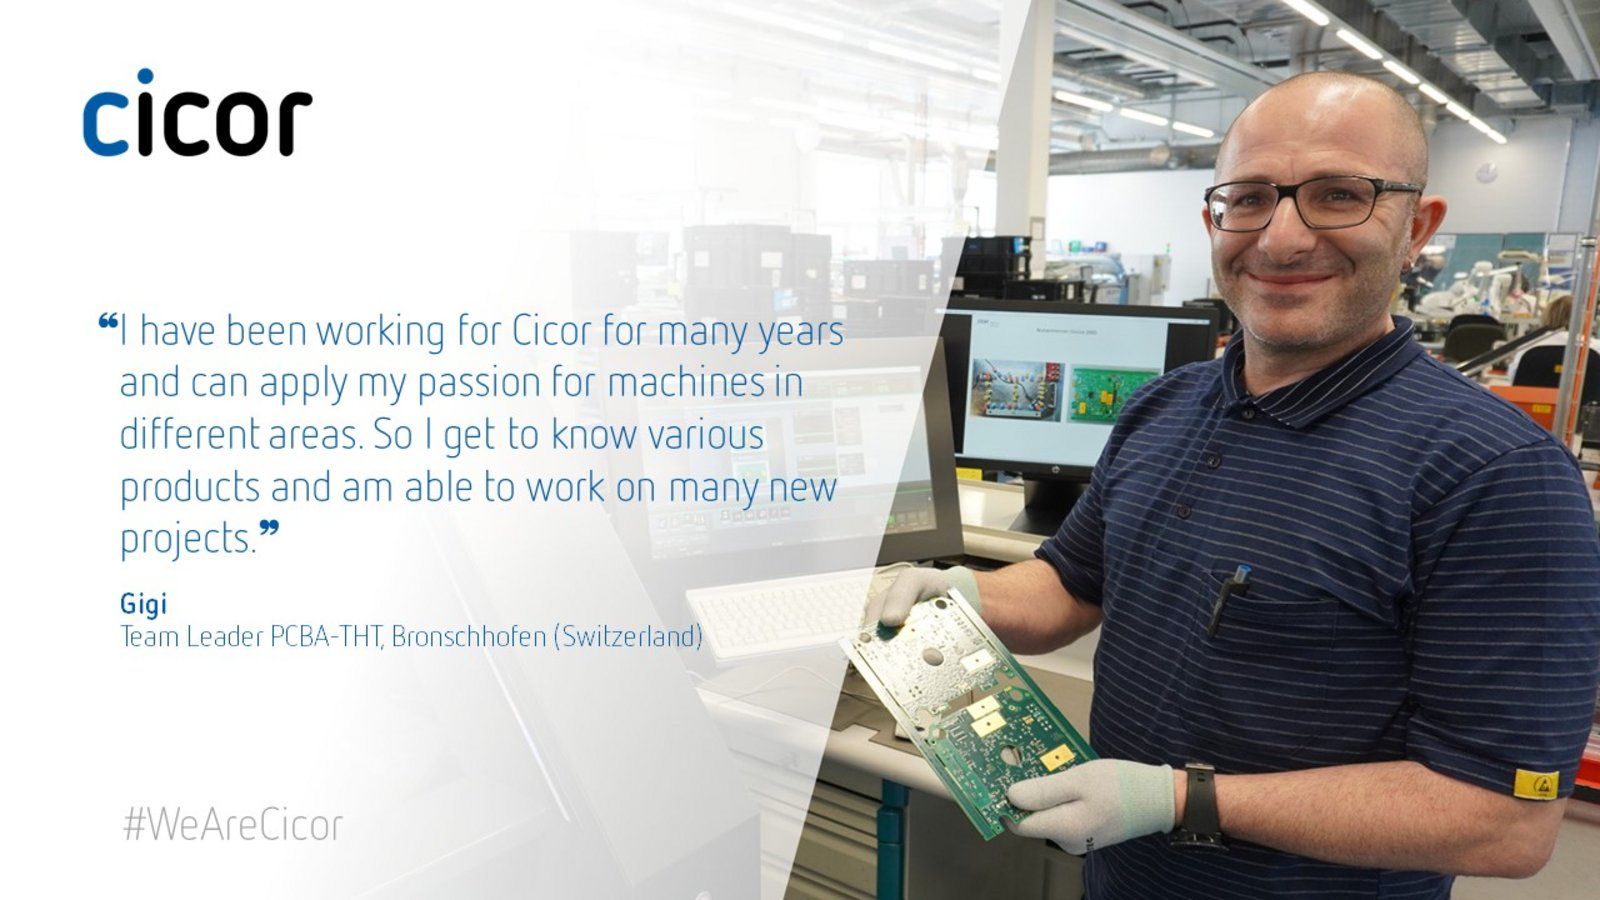 Testimonial of Gigi who works at the Cicor site in Bronschhofen